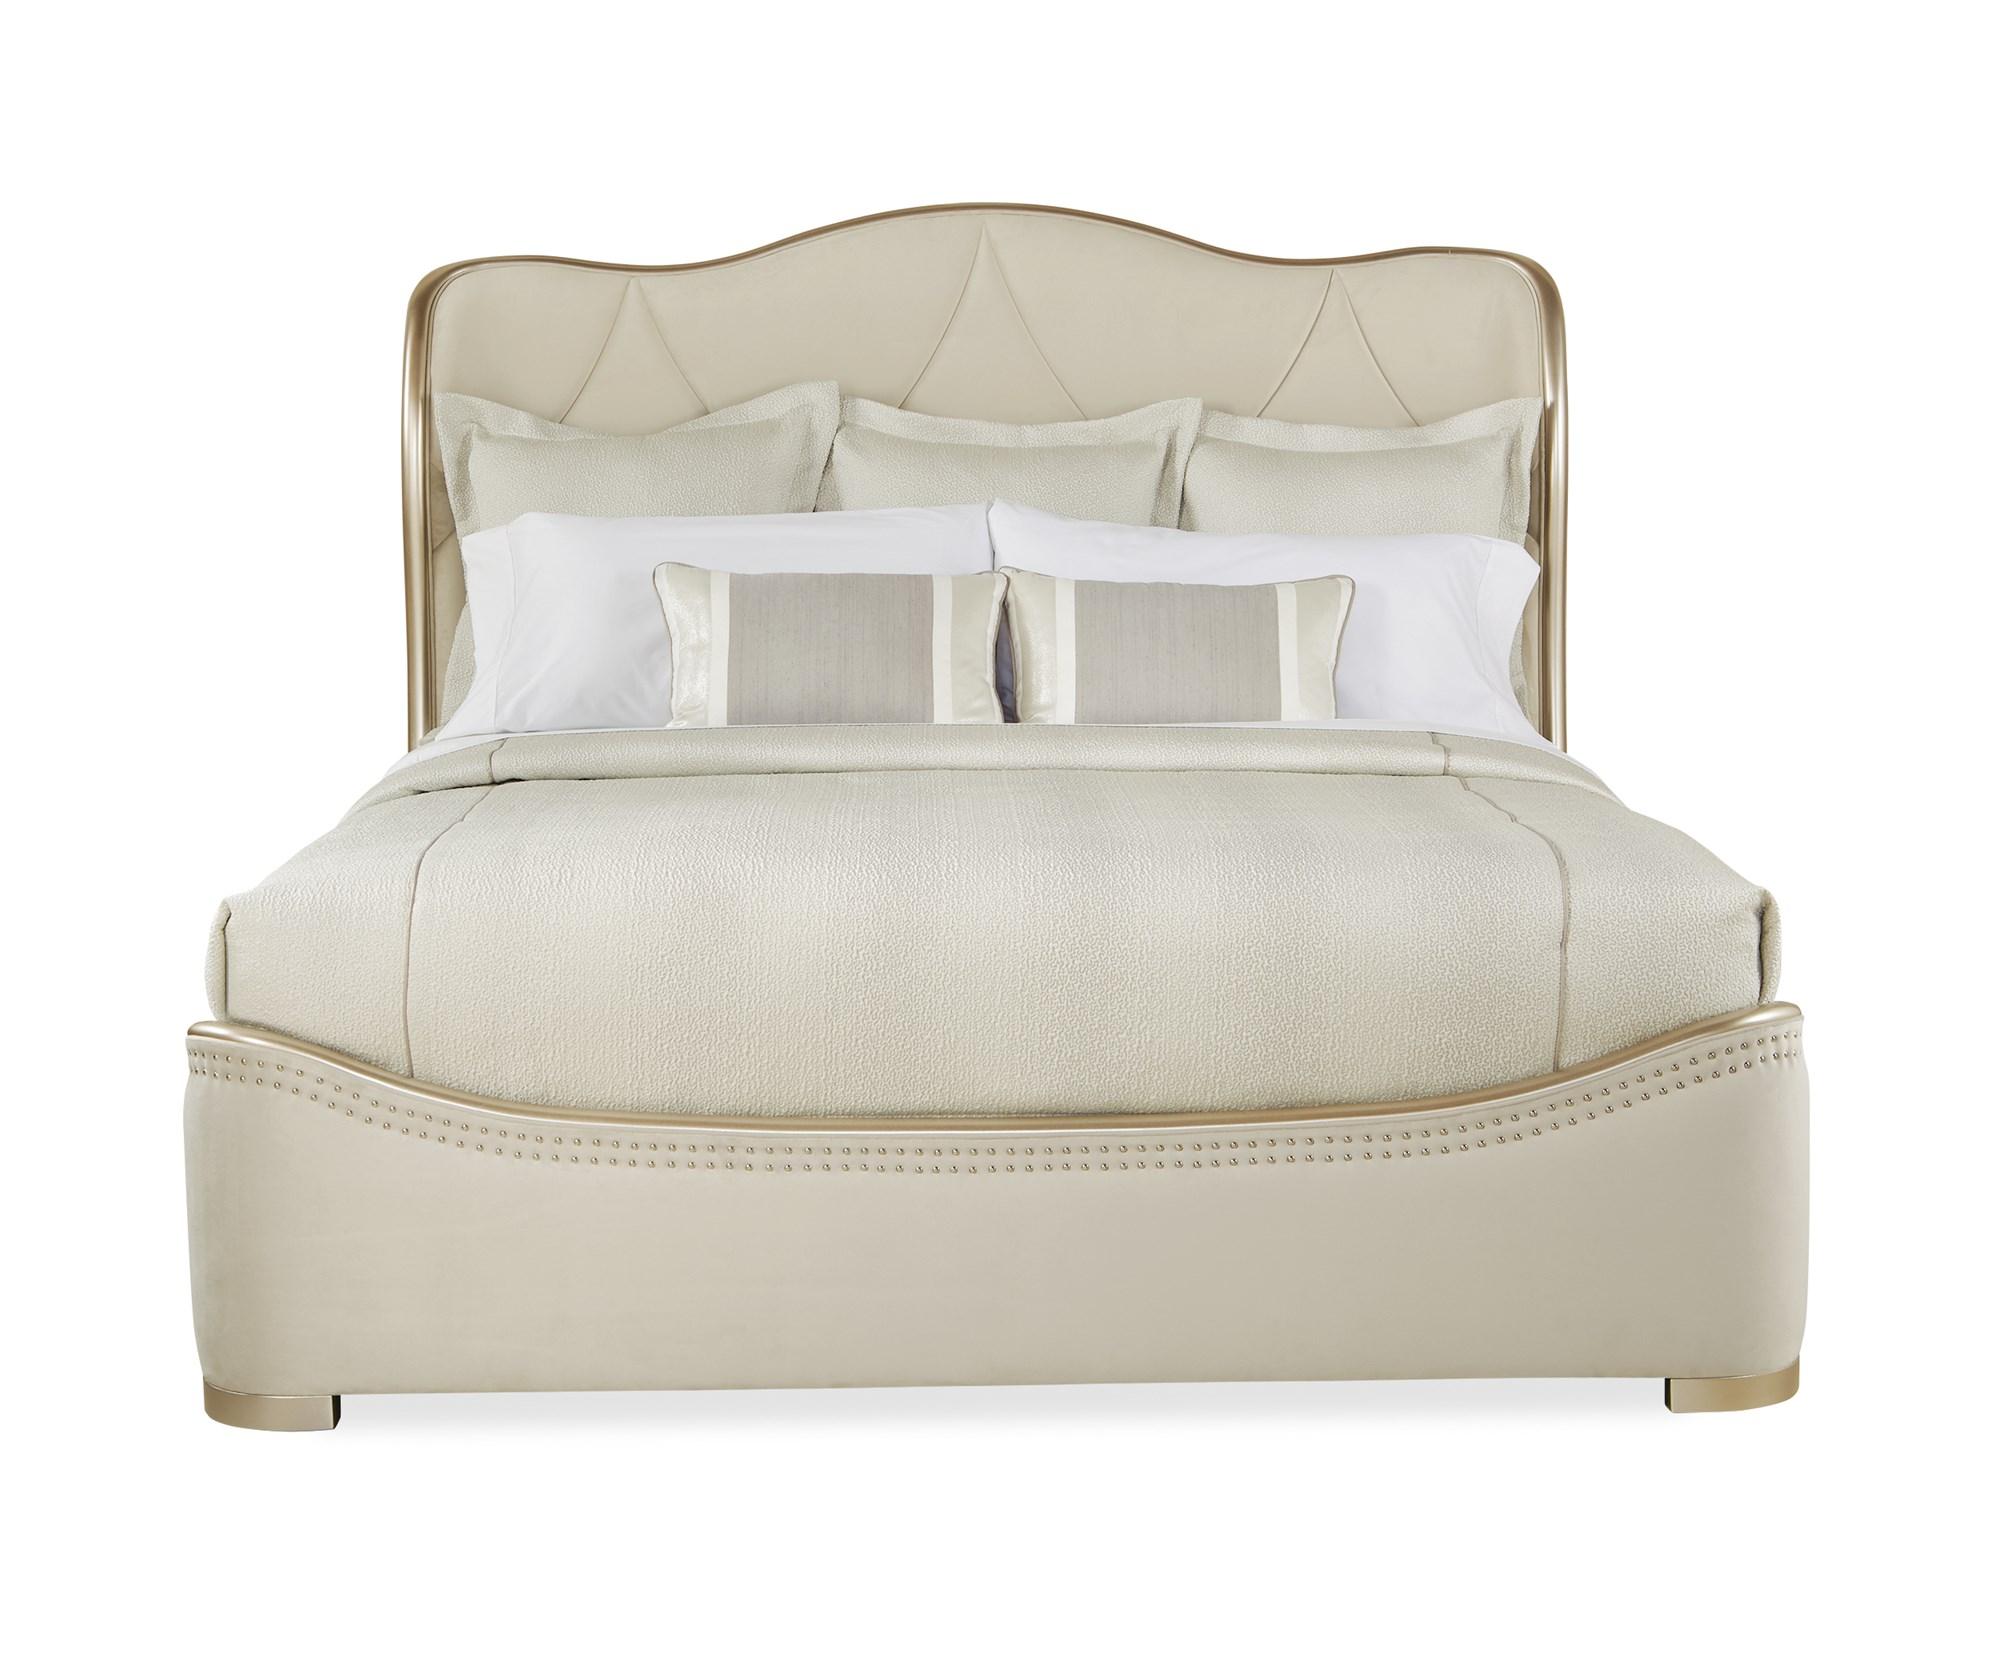 

    
Curvaceous Headboard Creamy Velvet Sleigh ADELA QUEEN BED by Caracole
